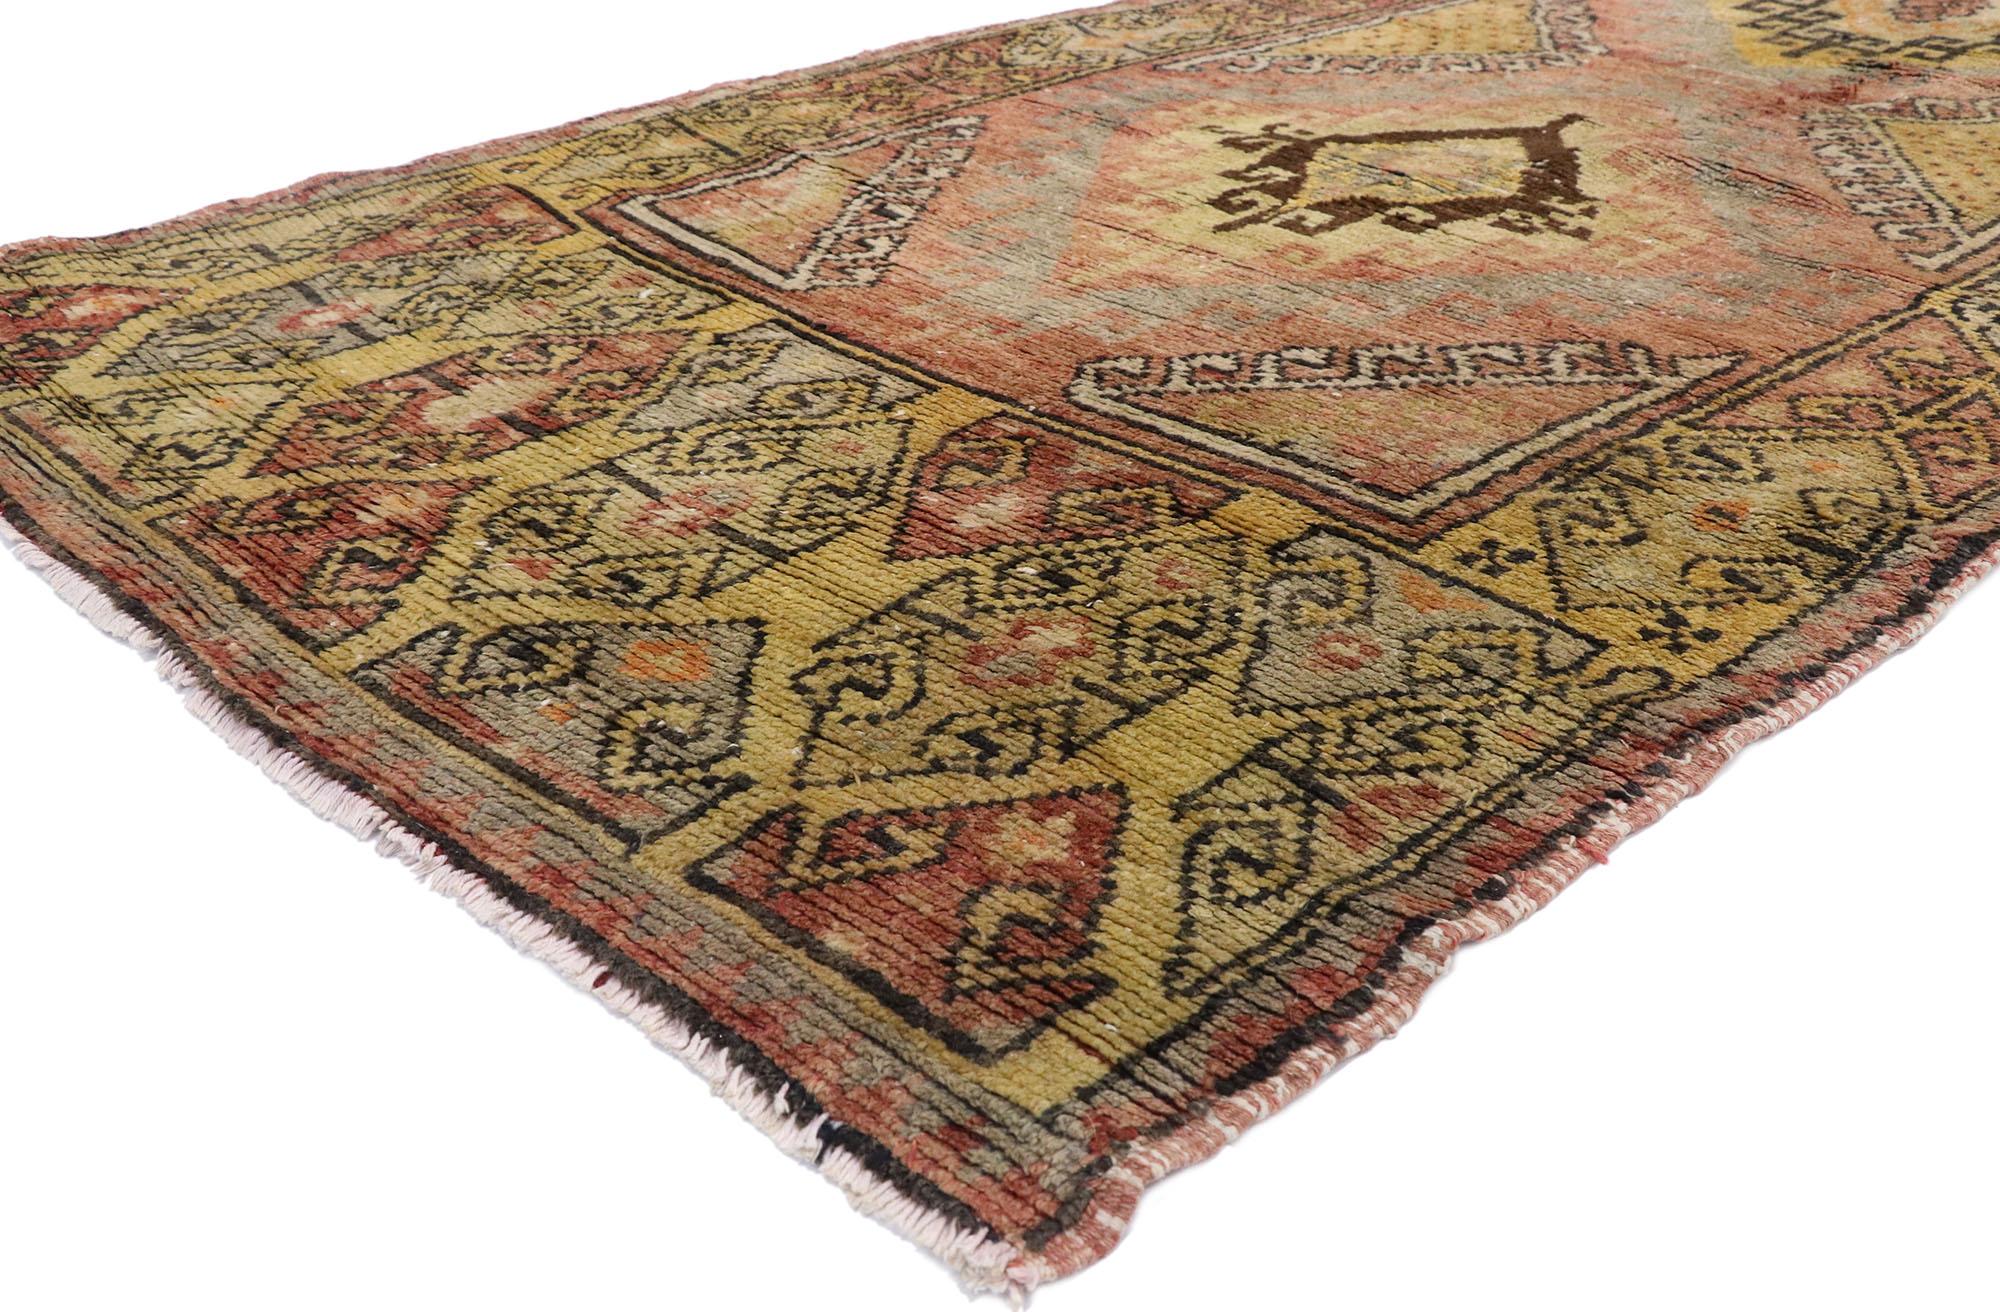 51659 Vintage Turkish Oushak Runner with Mid-Century Modern Style, Hallway Runner 03'10 x 11'07. This hand-knotted wool vintage Oushak runner features three diamond medallions bordered in 'tarantula' patterns; the amulet style medallions rest on a